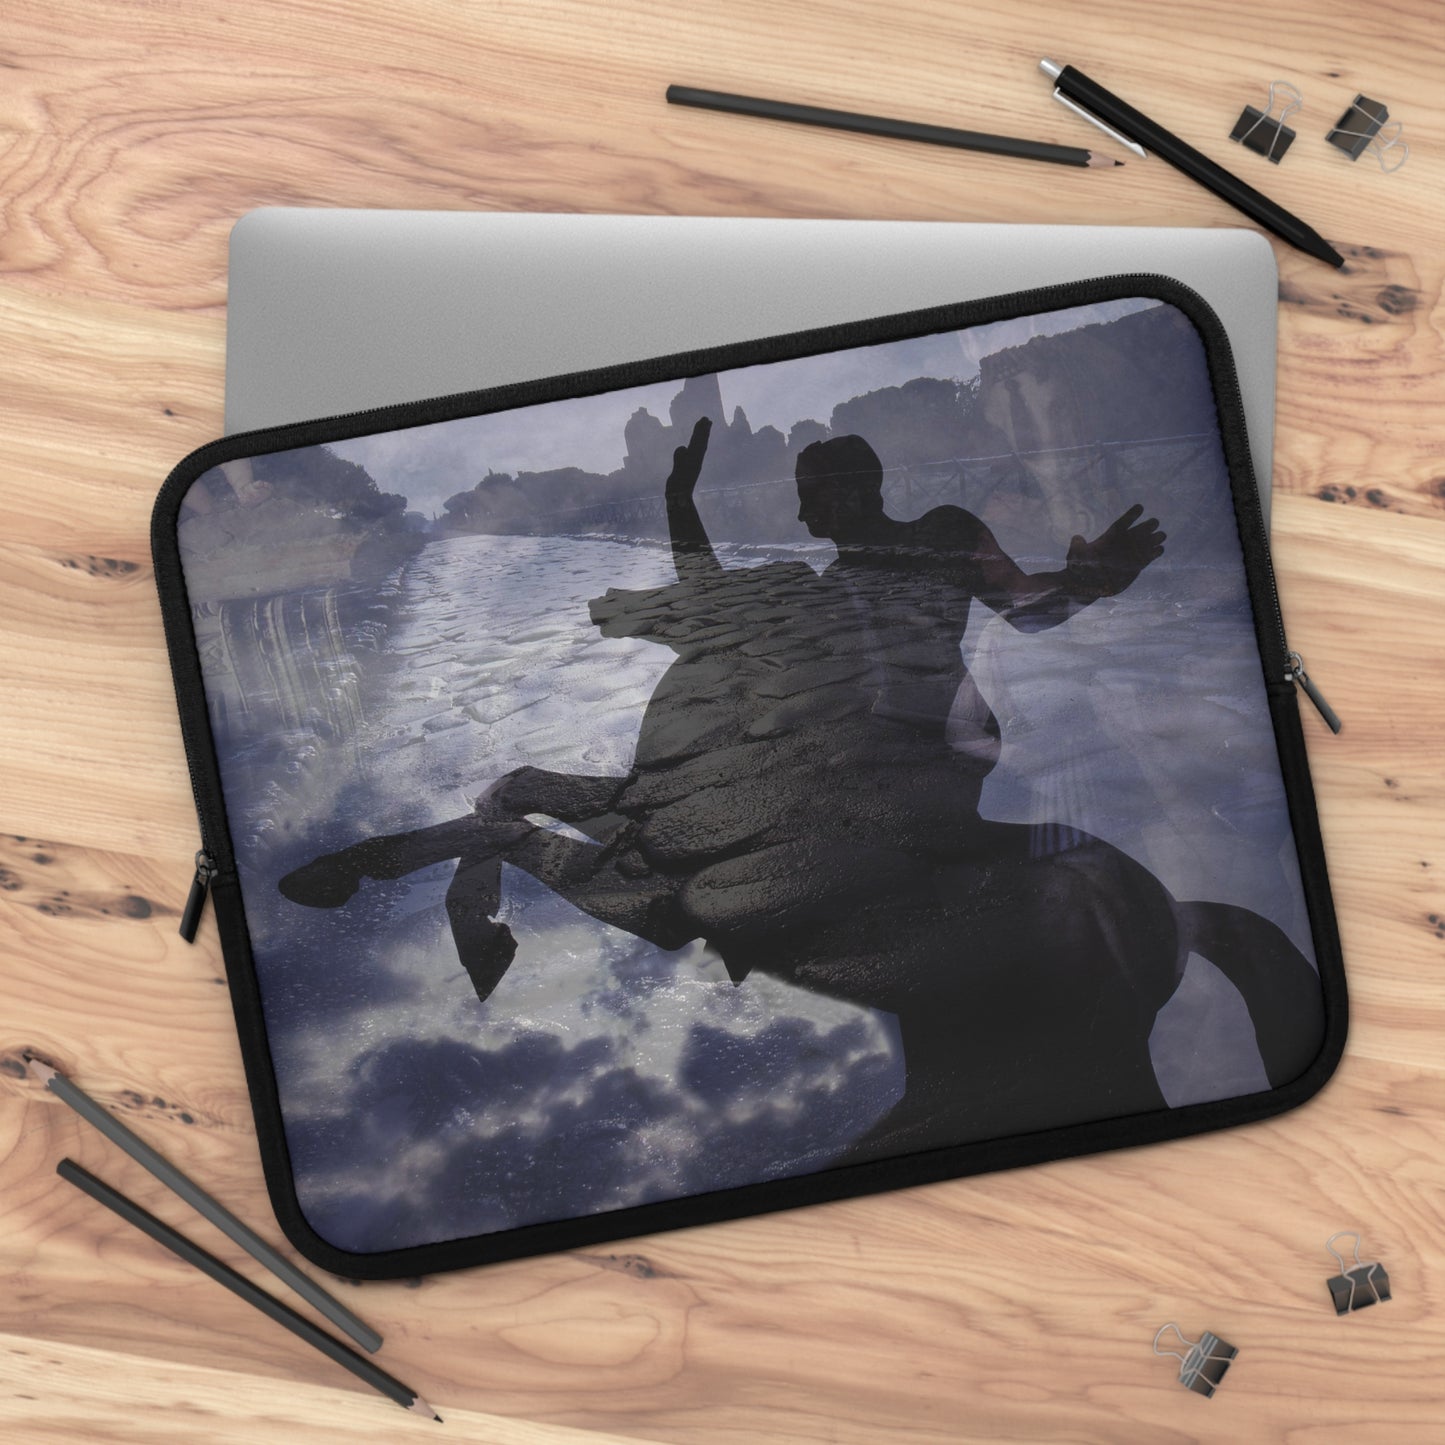 The Ancient Via Appia Laptop Sleeve